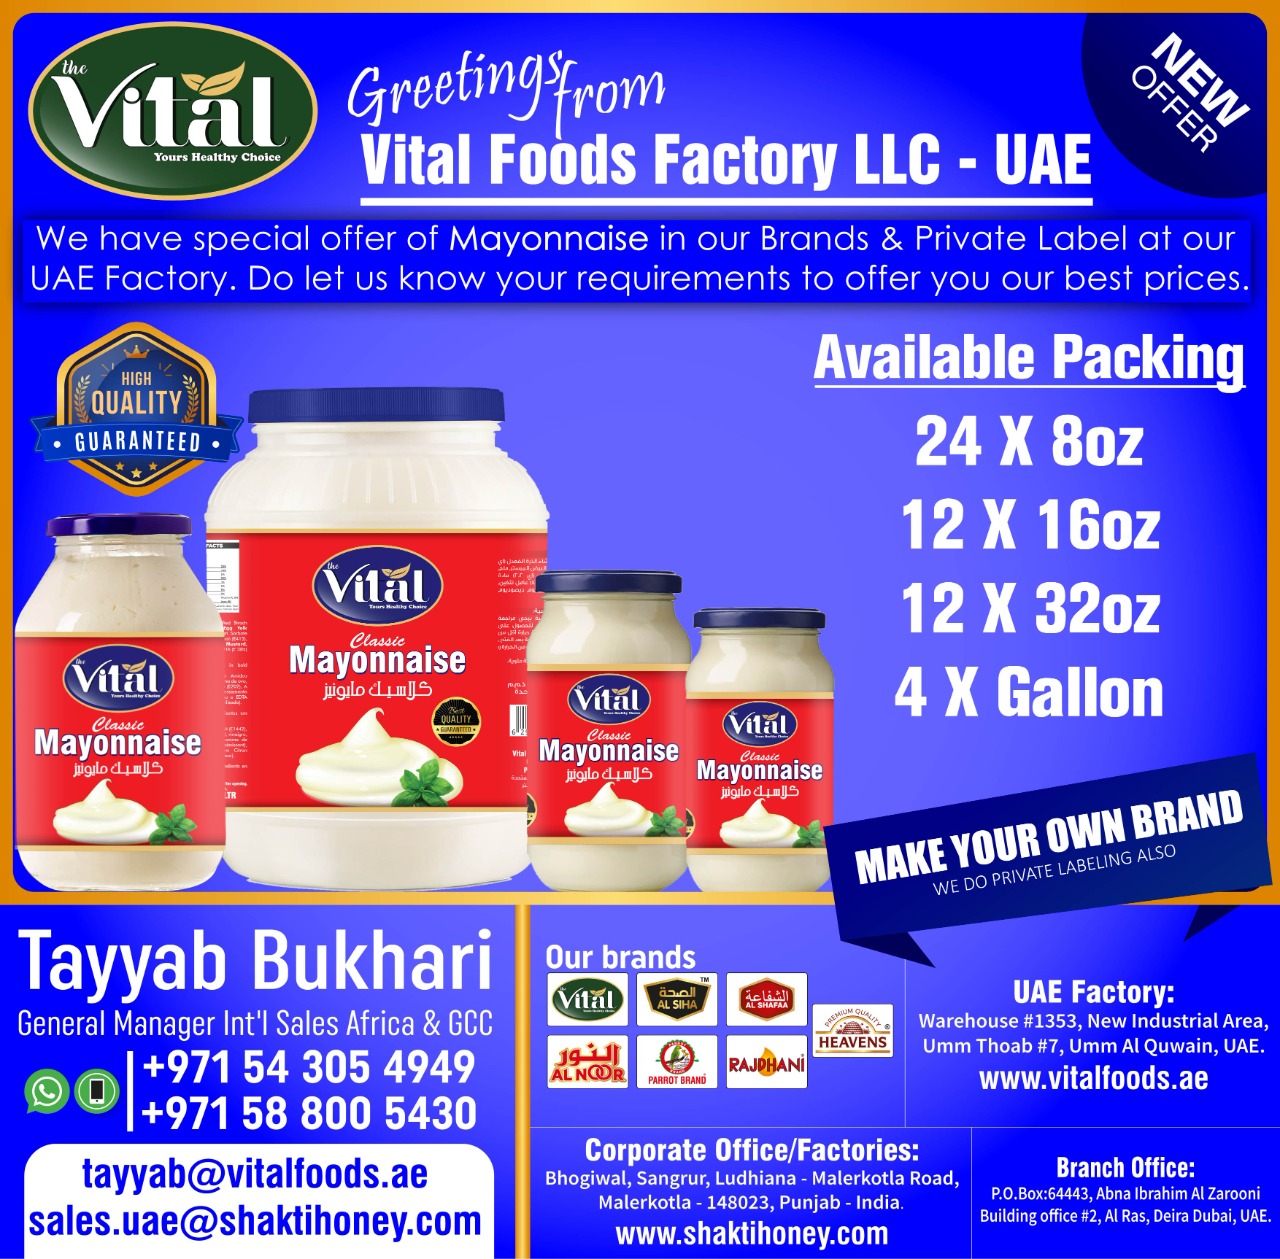 MAYONNAISE: (Real / Classic / Flavored / Eggless) Retail & Horeca packing available